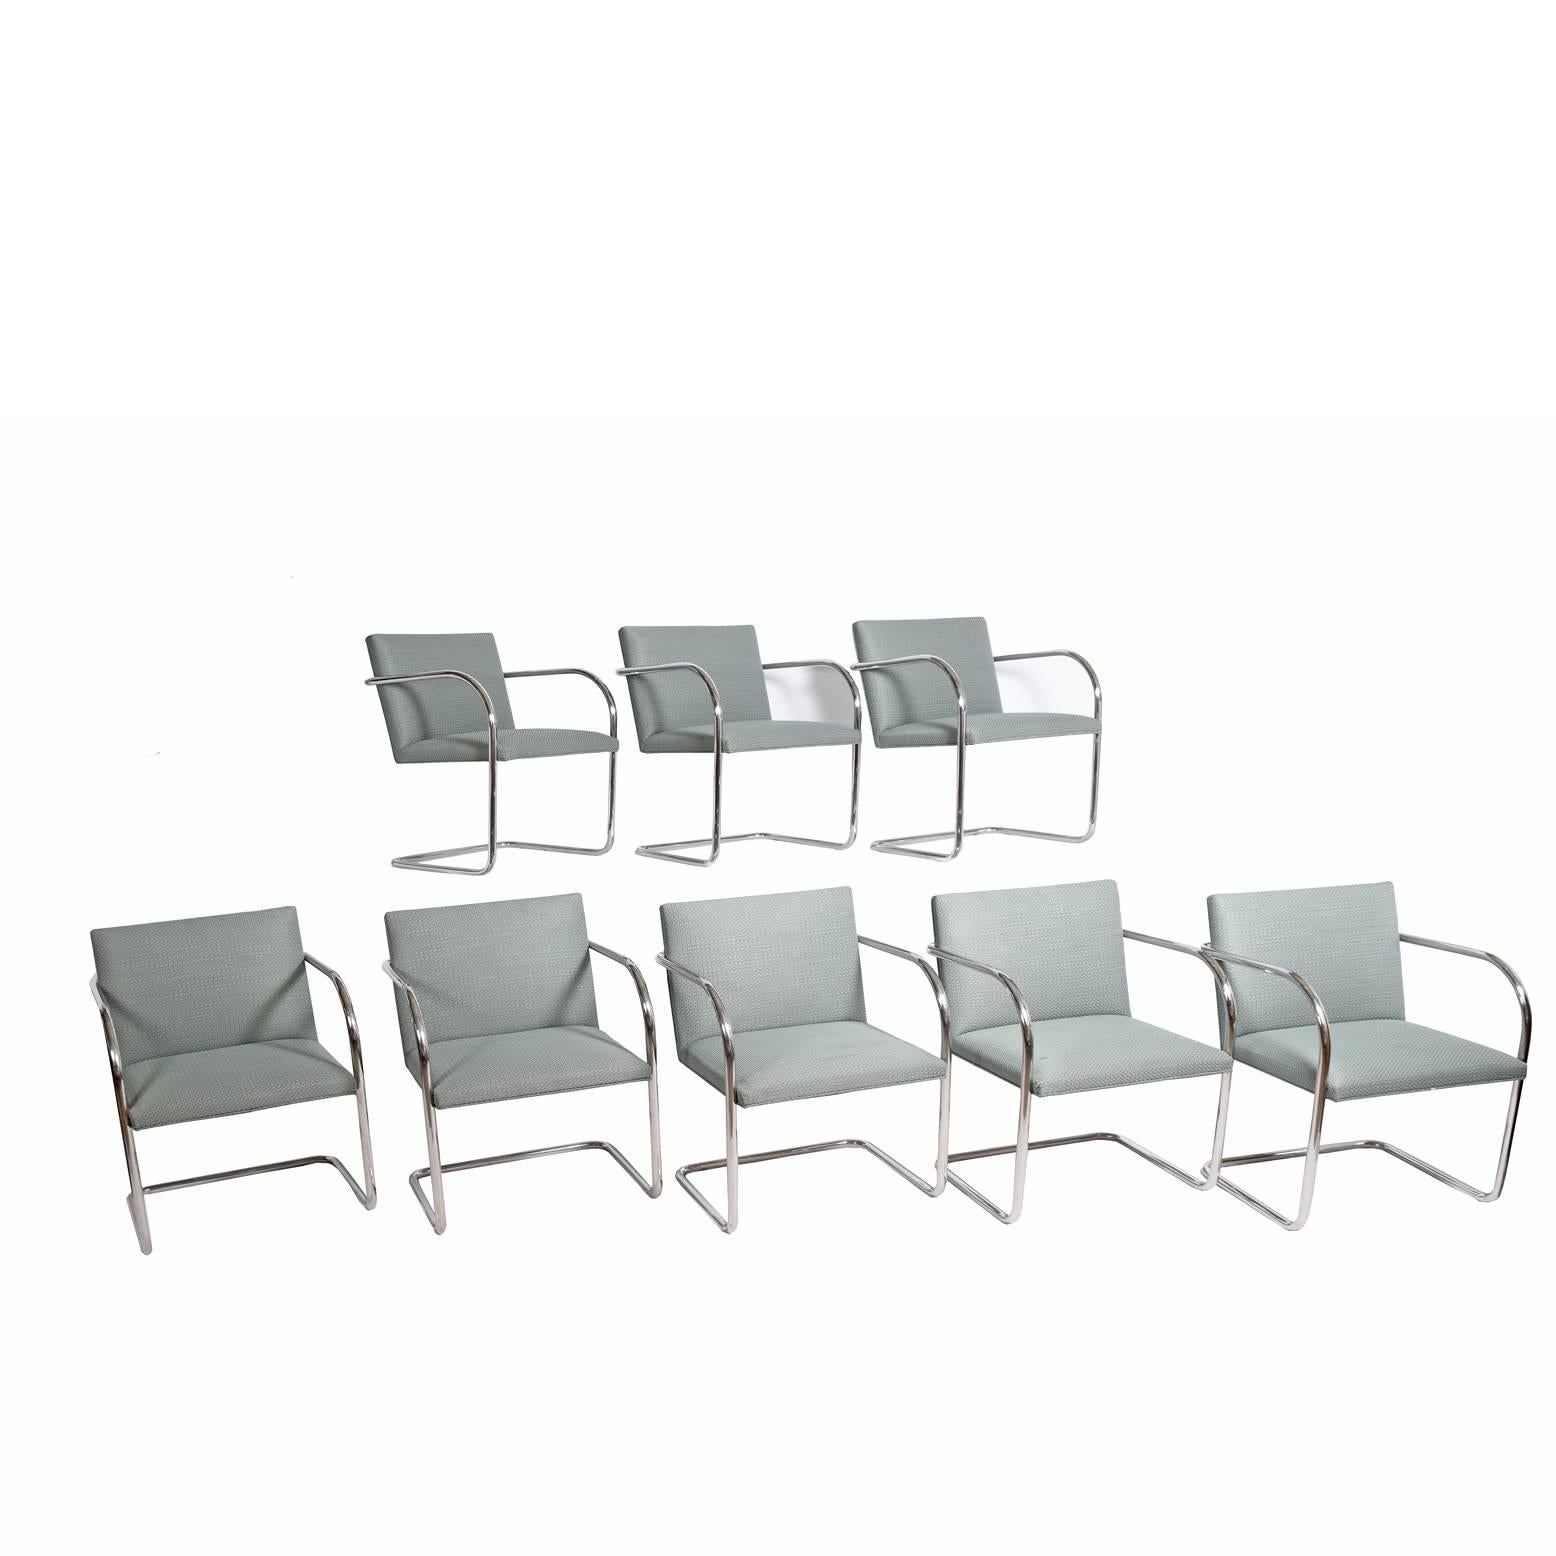 Eight stainless steel Classic tubular Brno chairs, original contract Knoll fabric
Made by Knoll Inc.
Measure: Arm height 25.75